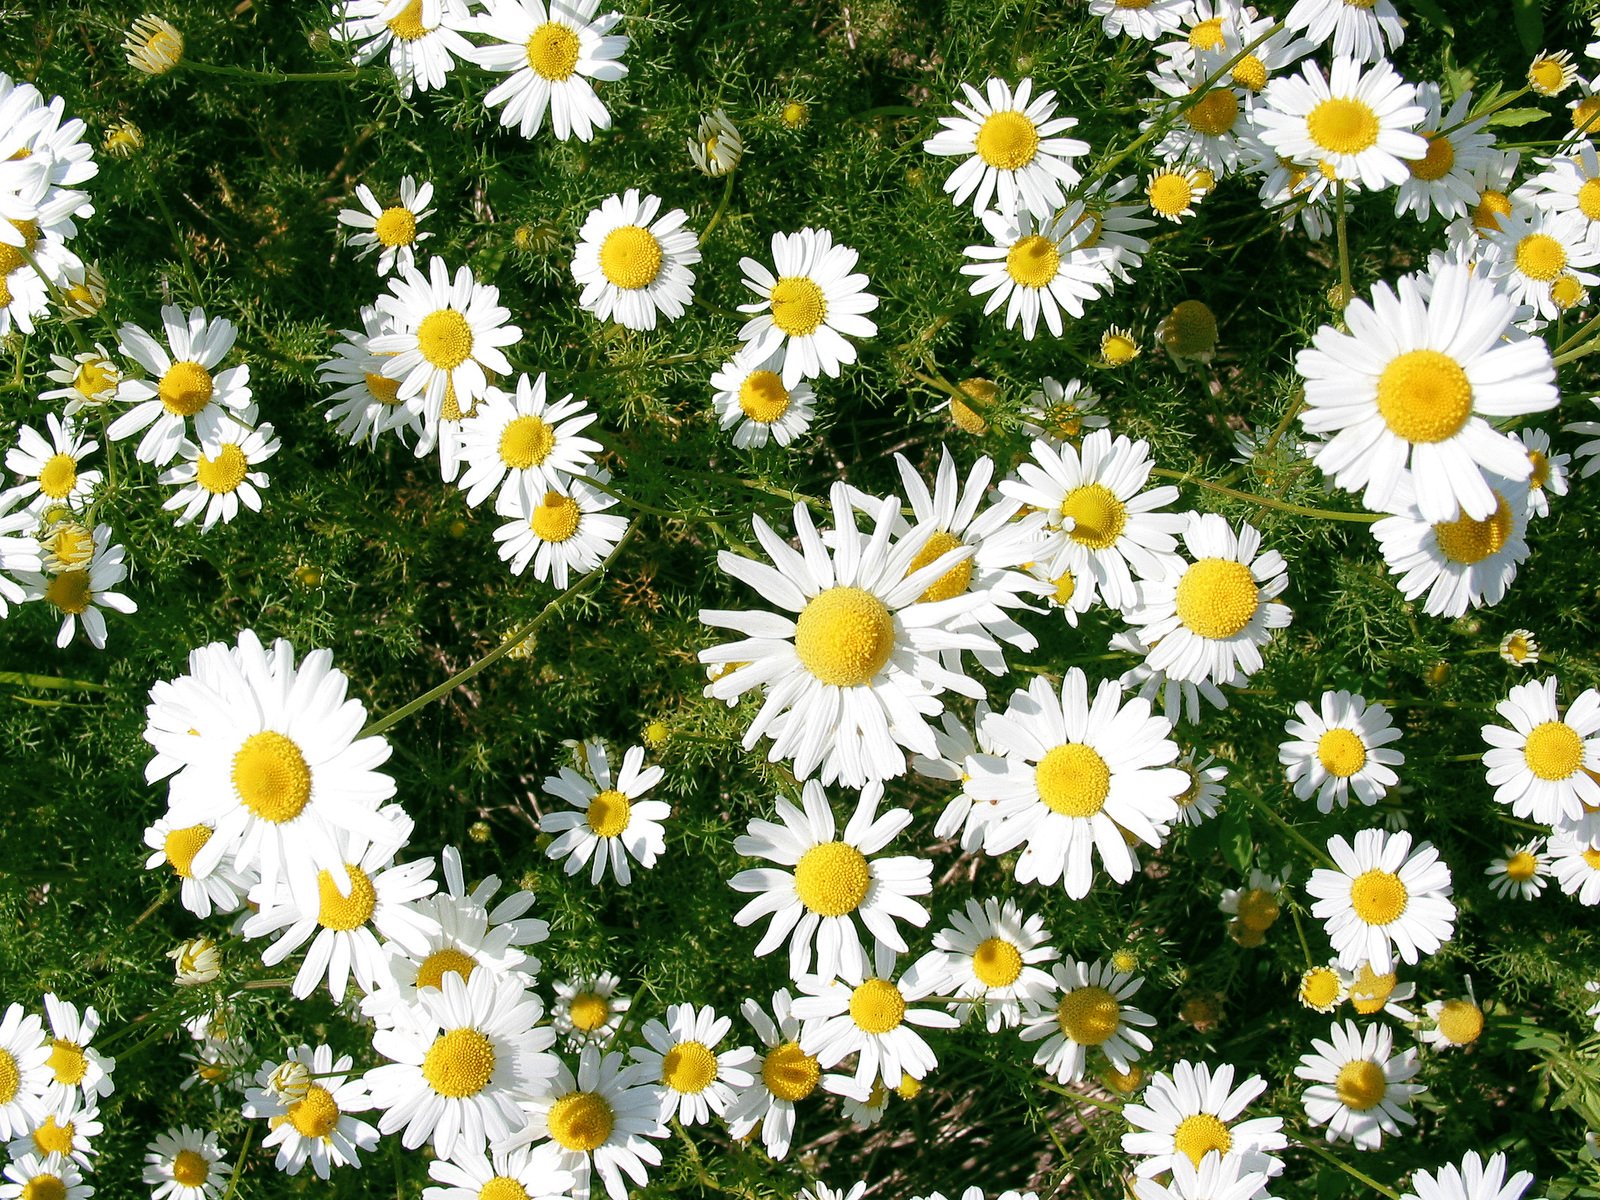 several white and yellow flowers are in the middle of grass